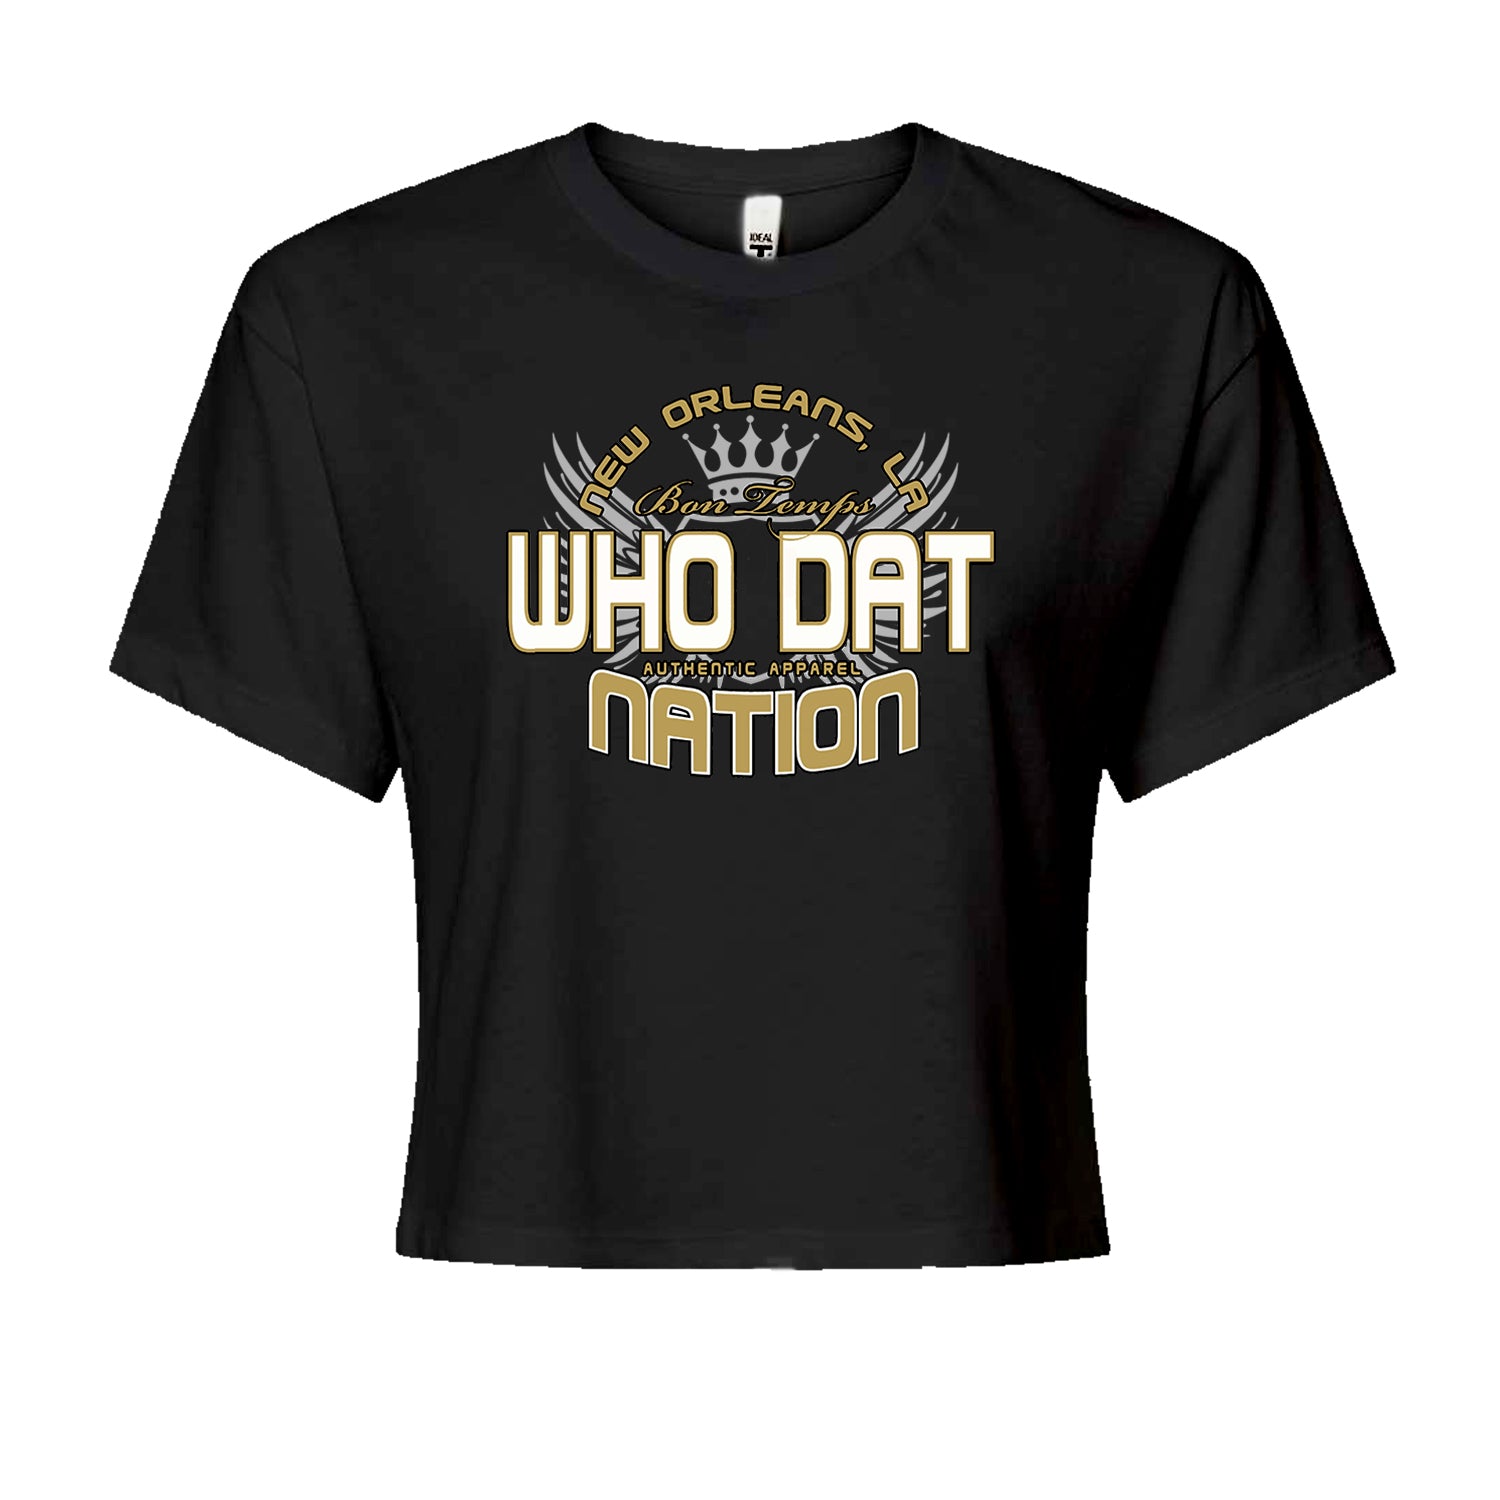 Who Dat Nation New Orleans (Color) Cropped T-Shirt